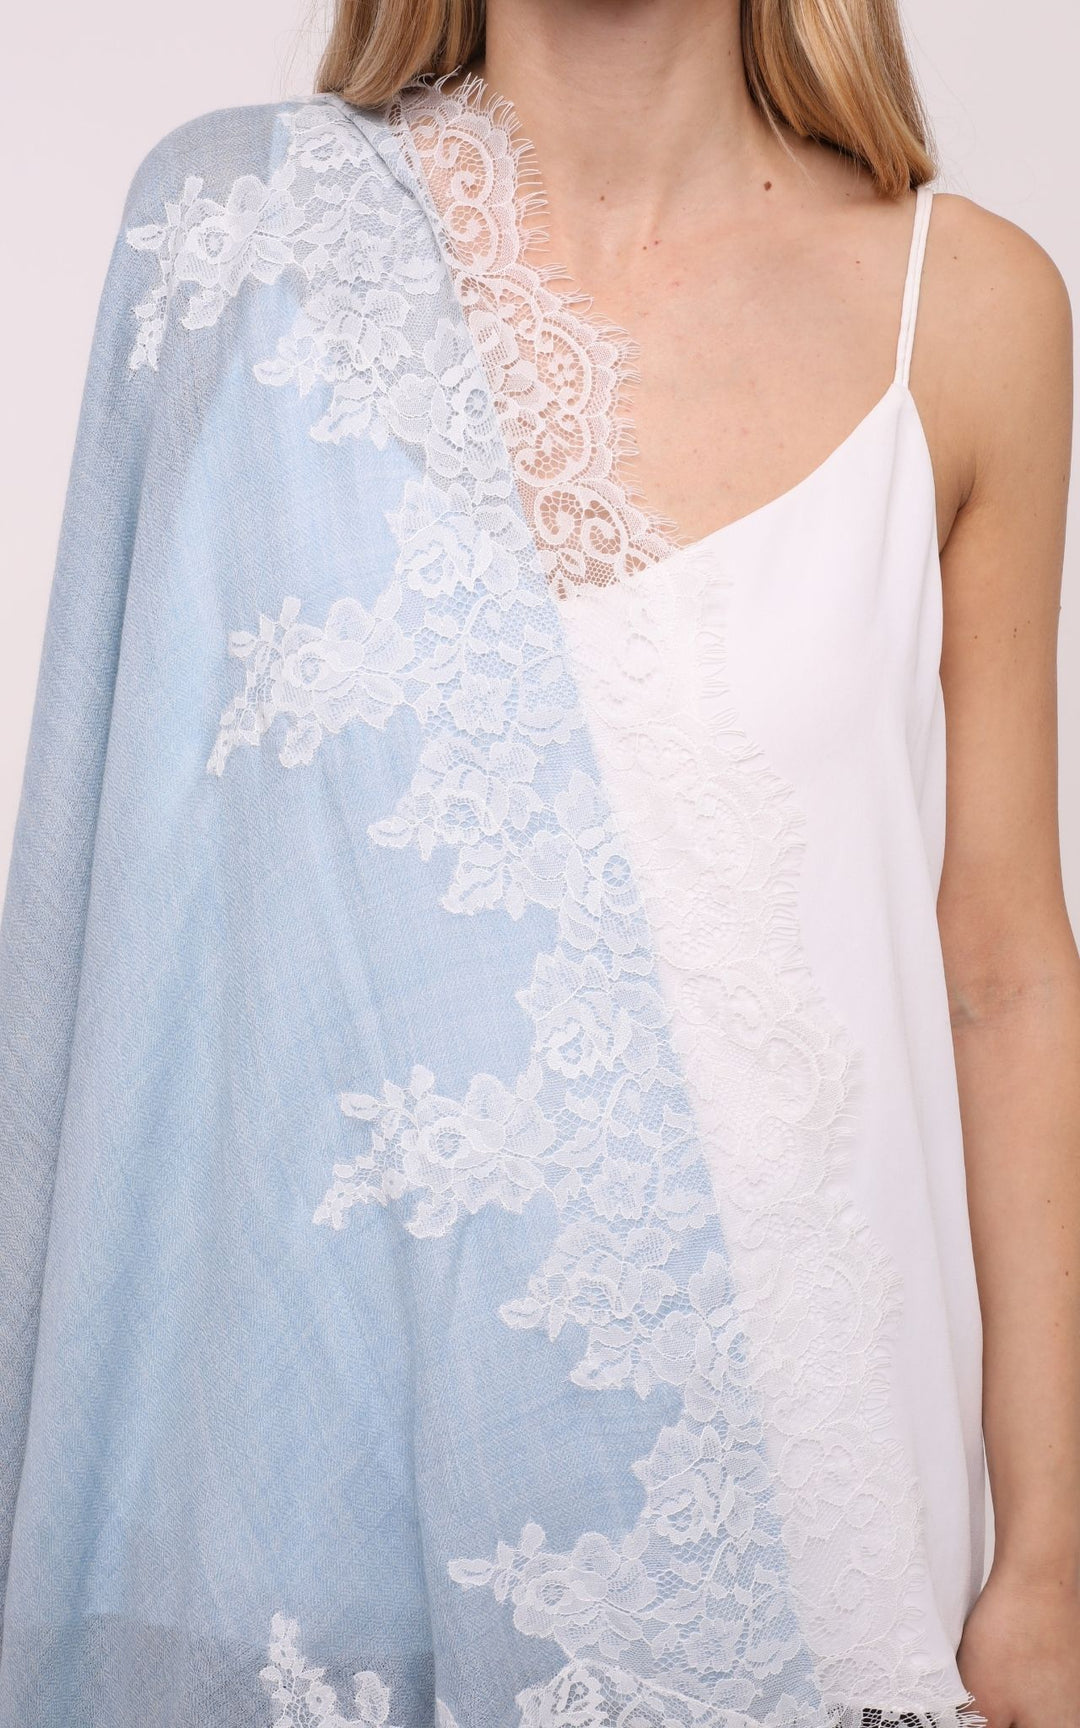 Baby Blue Scarf with White Lace